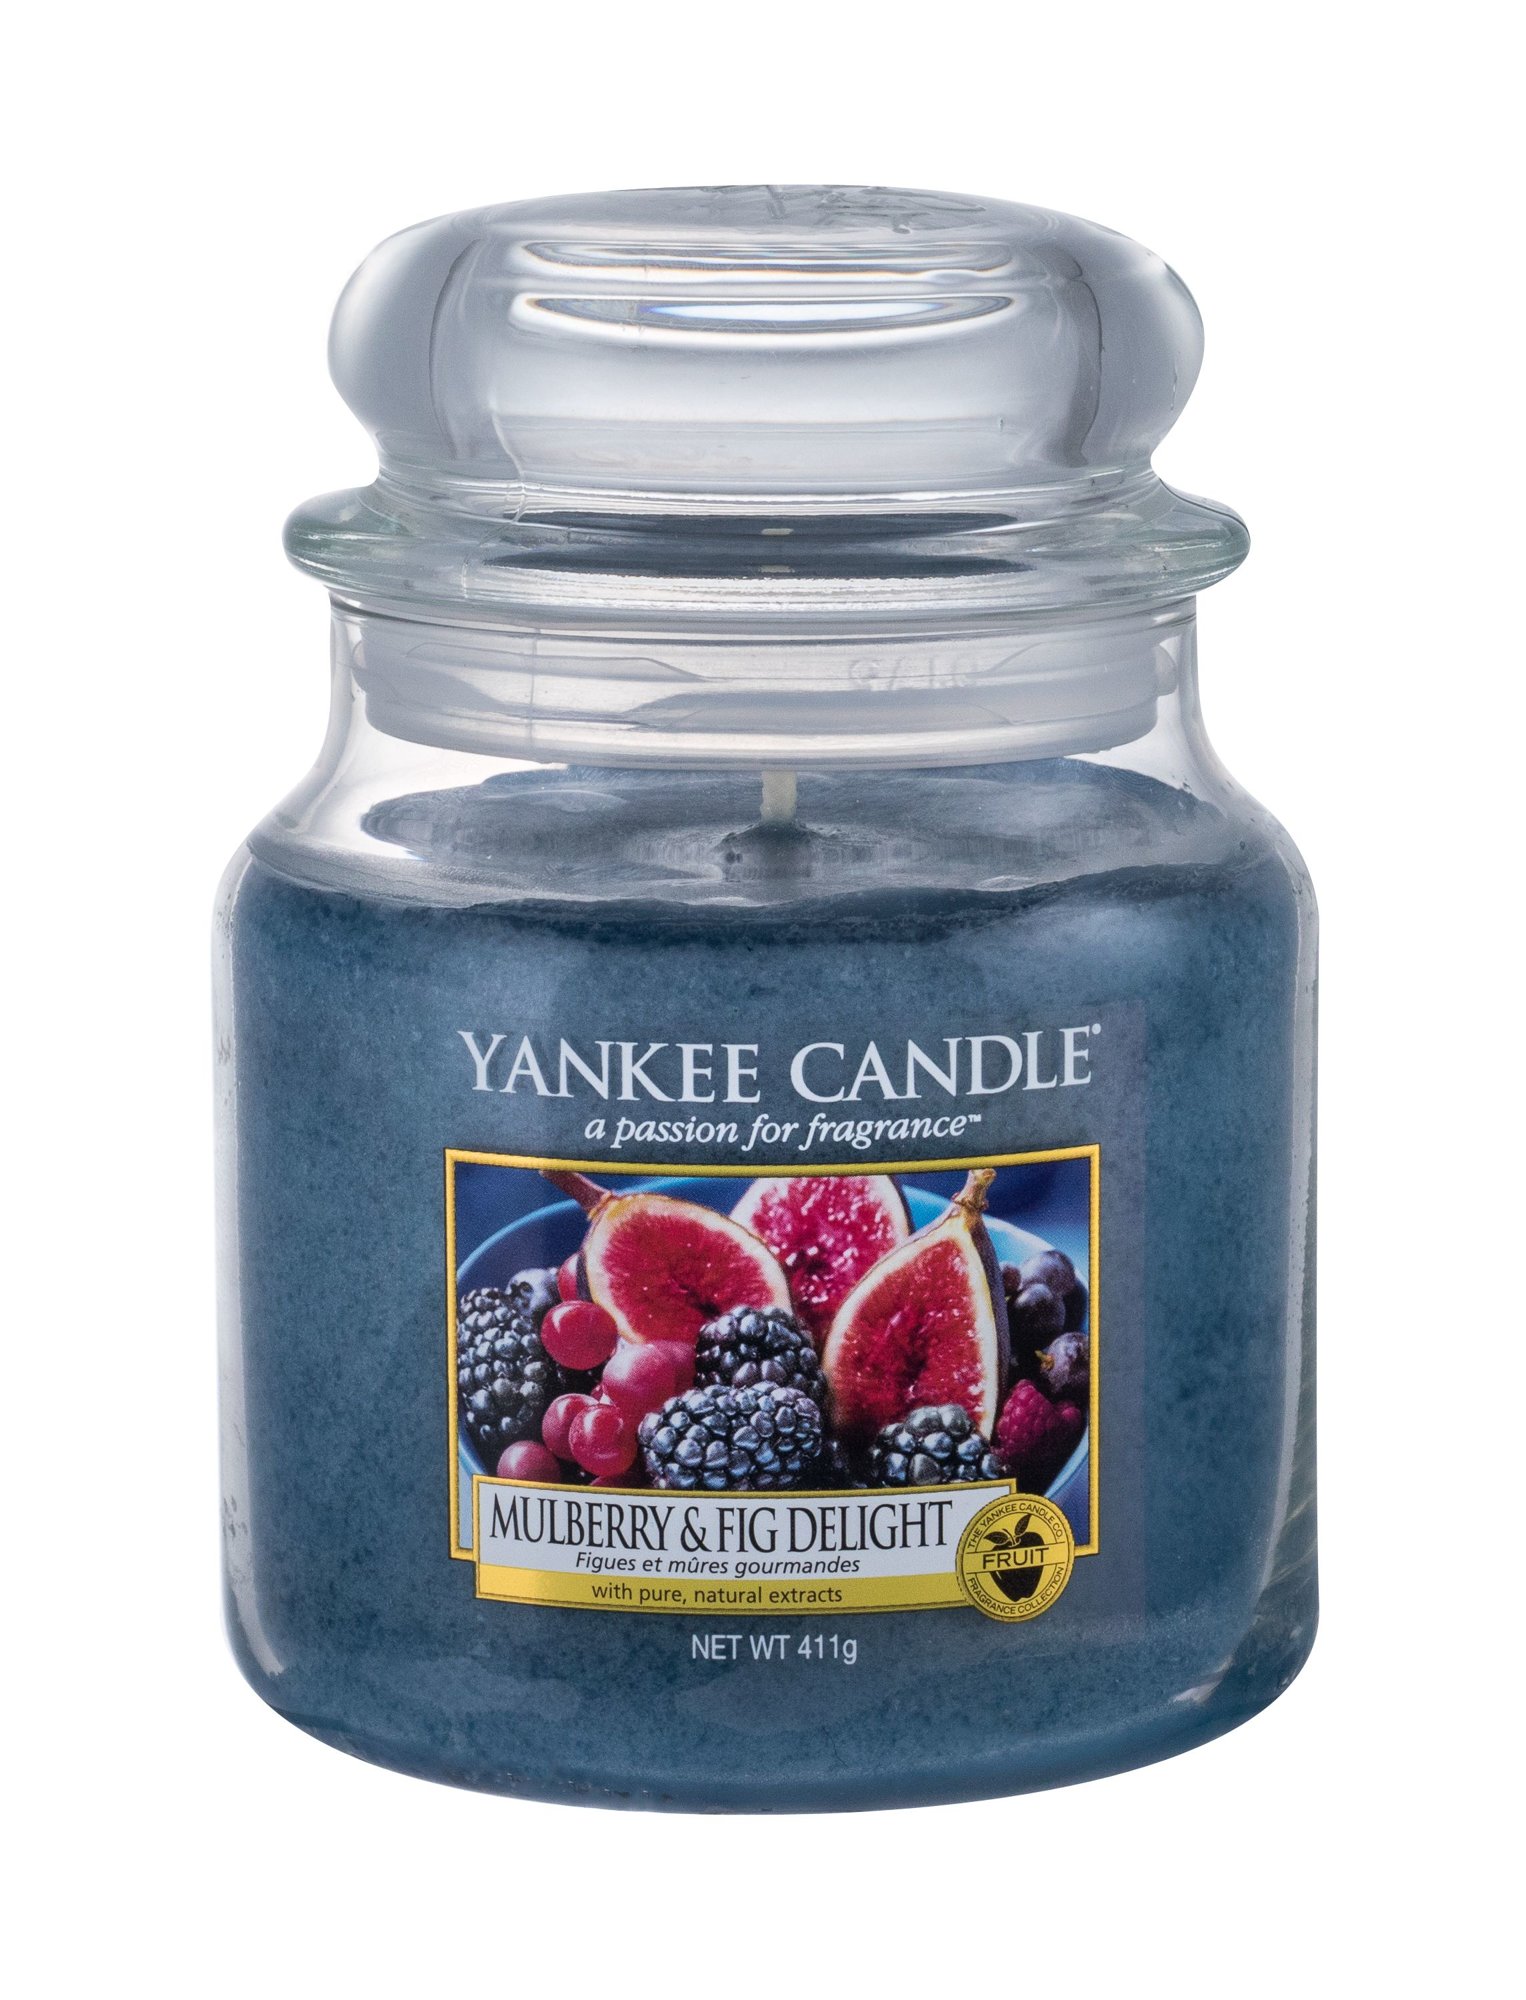 Yankee Candle Mulberry & Fig Delight 411g Kvepalai Unisex Scented Candle